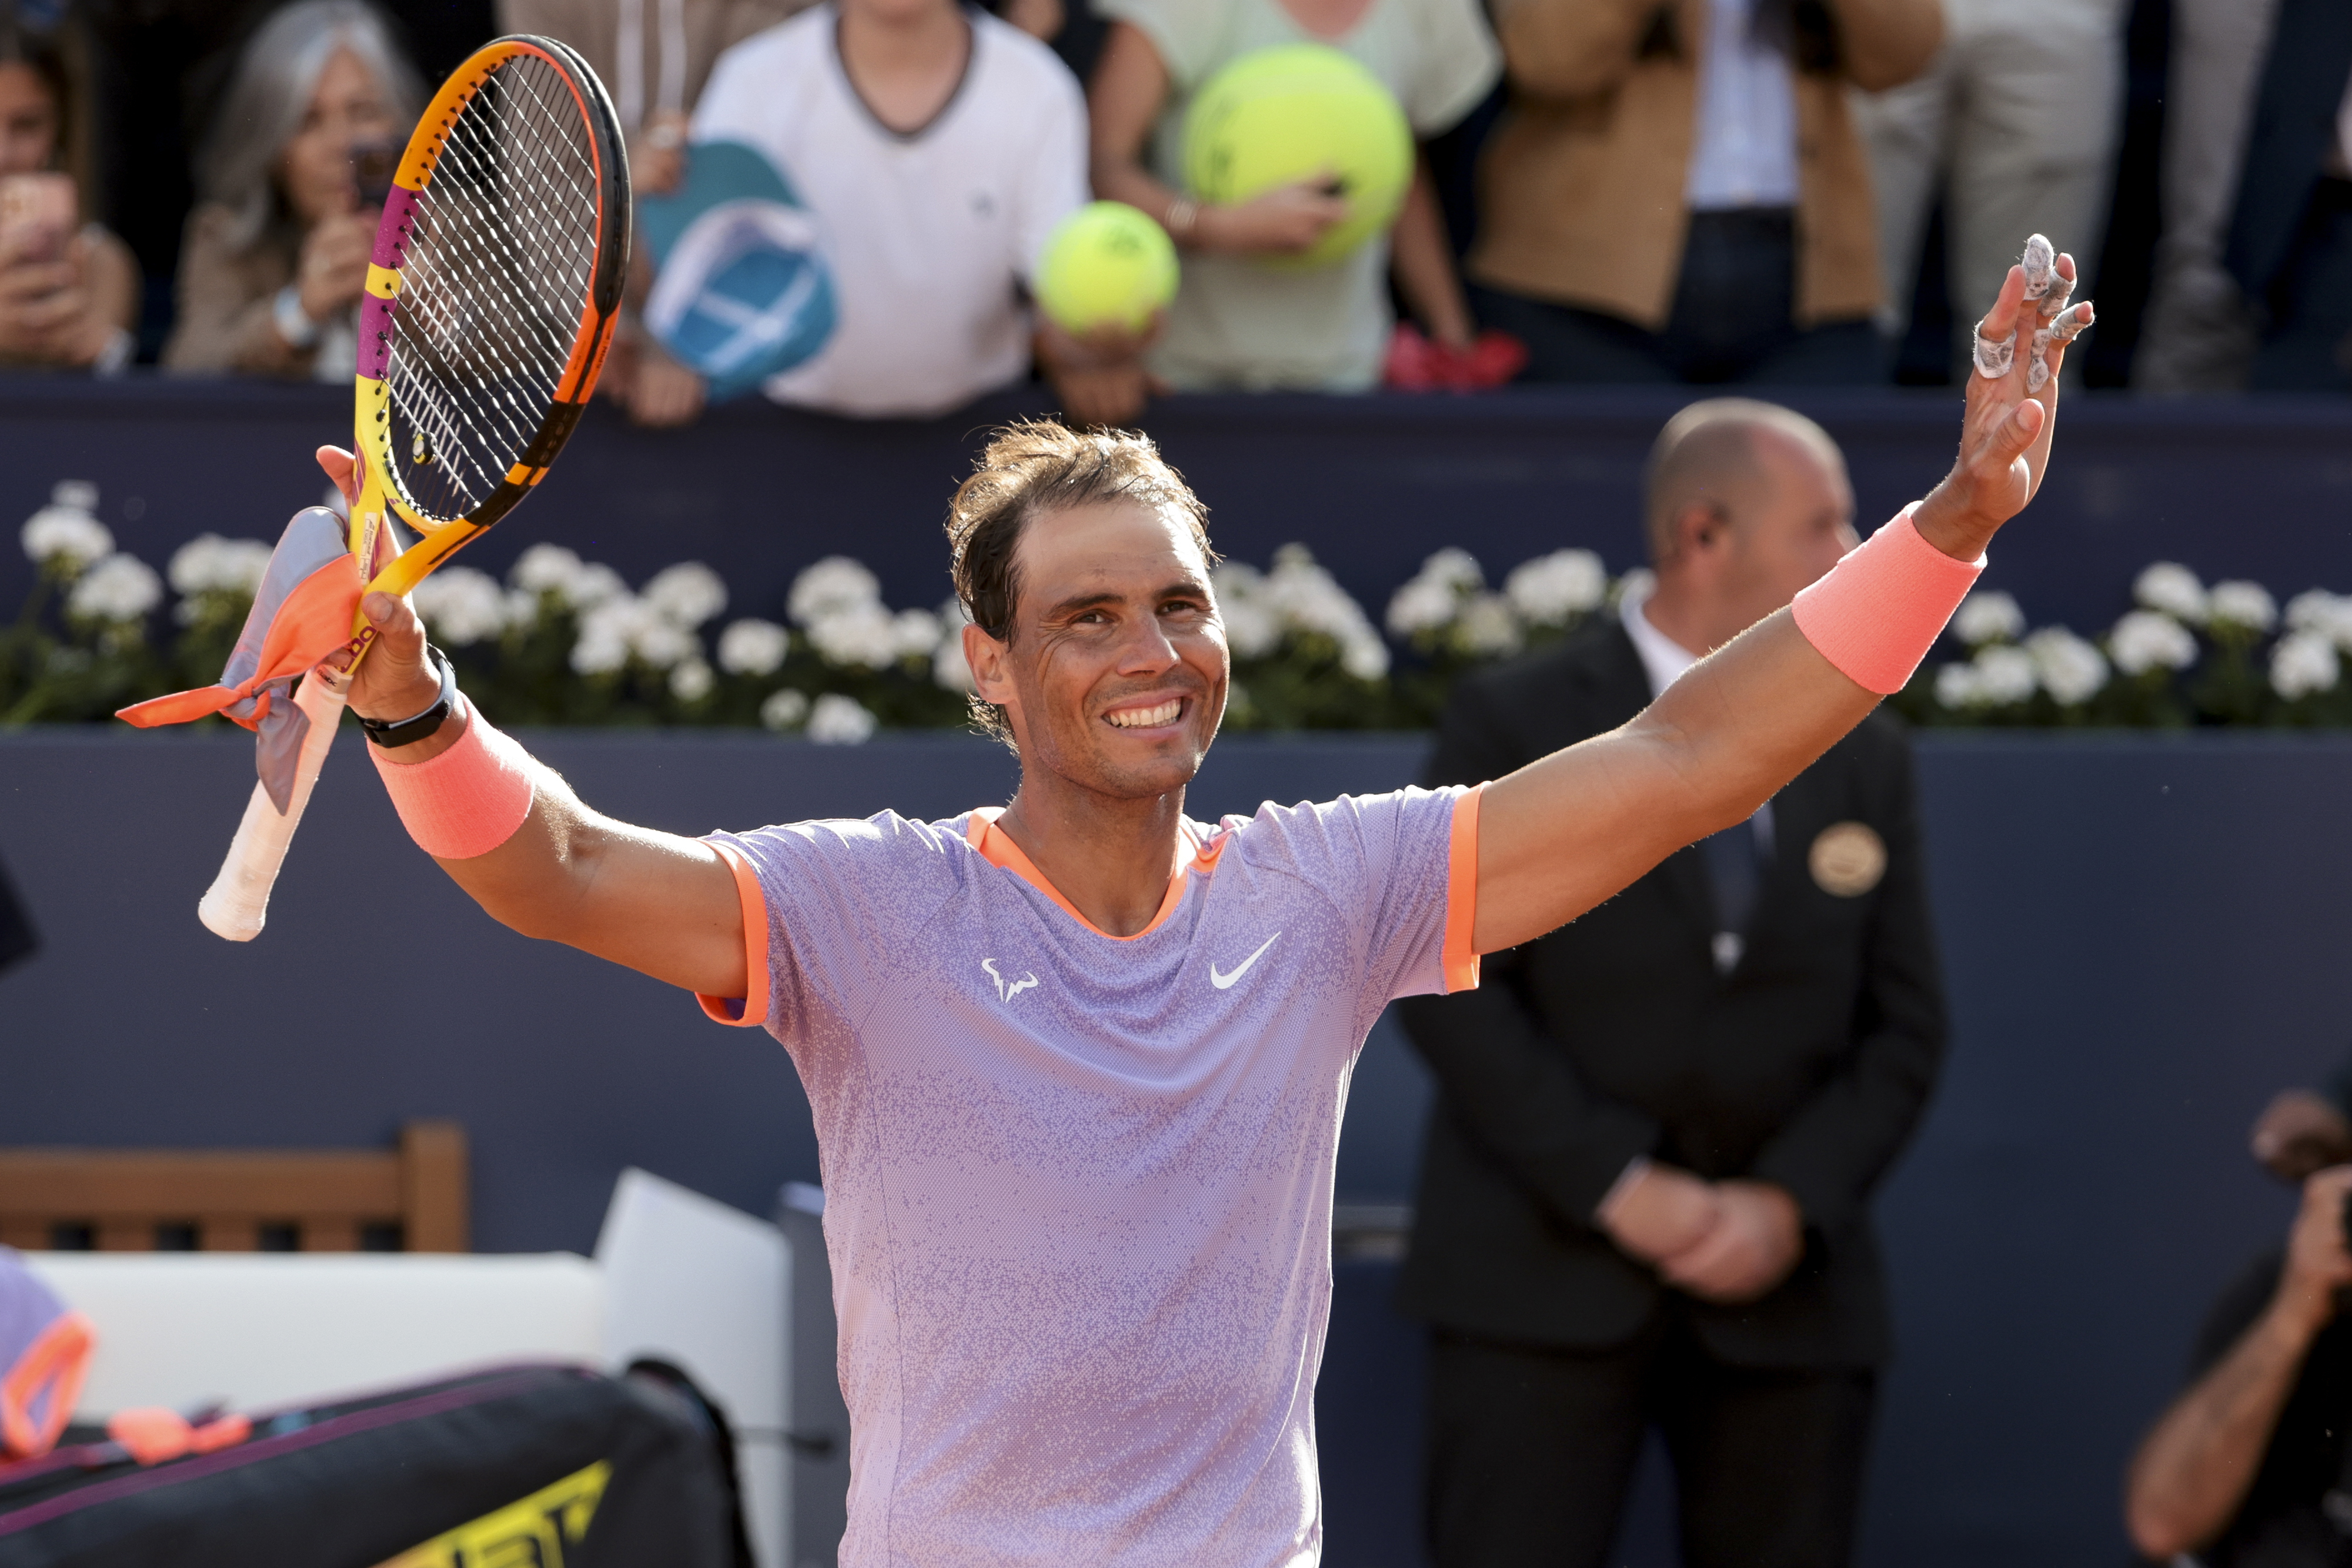 Rafael Nadal of Spain celebrates his first round victory over Flavio Cobolli of Italy on day two of the Barcelona Open.